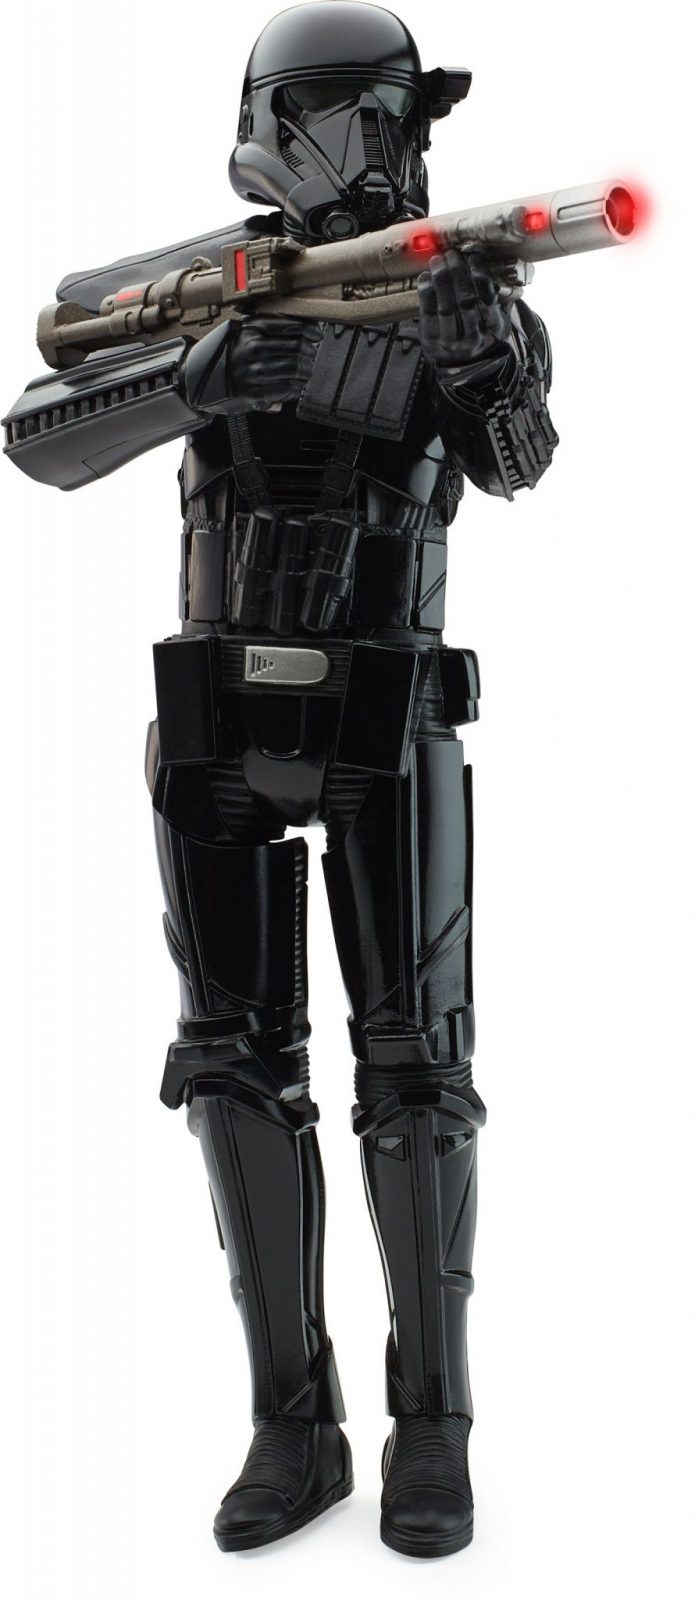 IMPERIAL DEATH TROOPER 12 INCH ELECTRONIC DUEL FIGURE (2)